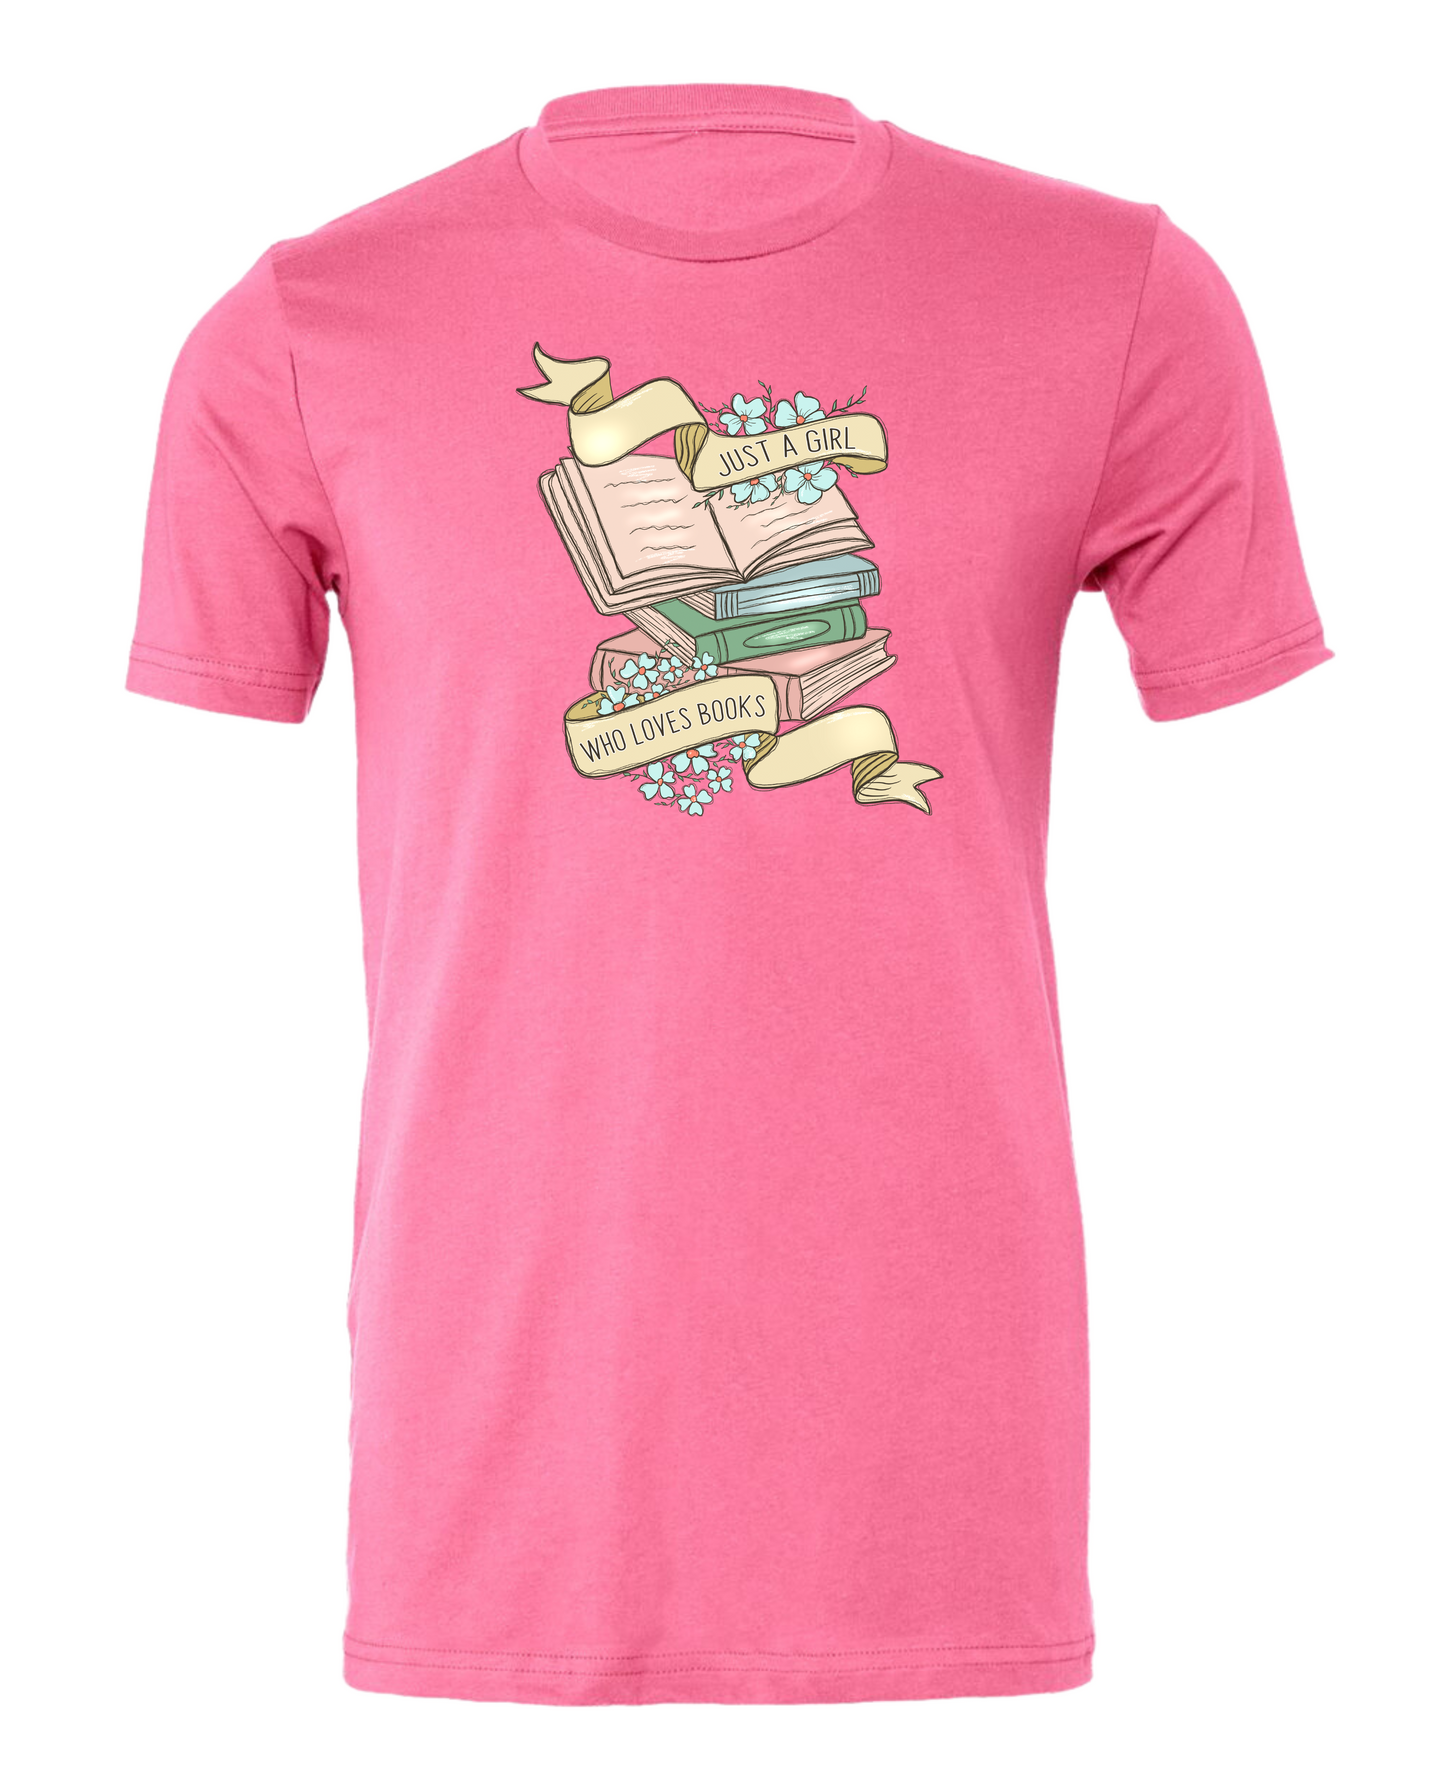 Just A Girl Who Likes to Read Short Sleeve Shirt - DTG